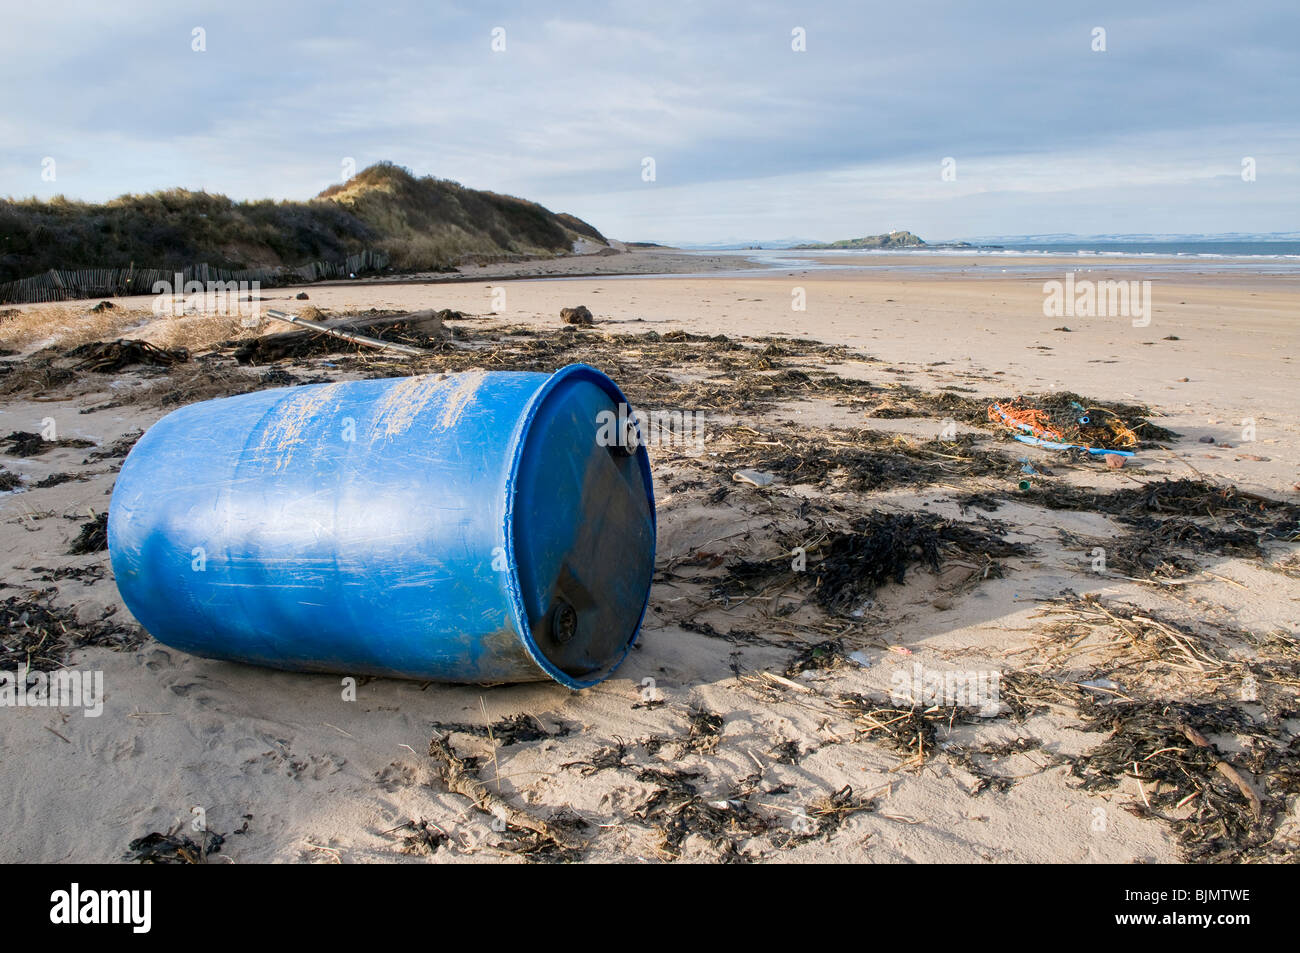 A large blue plastic oil drum washed up on a beach in the Firth of Forth, Scotland. Stock Photo